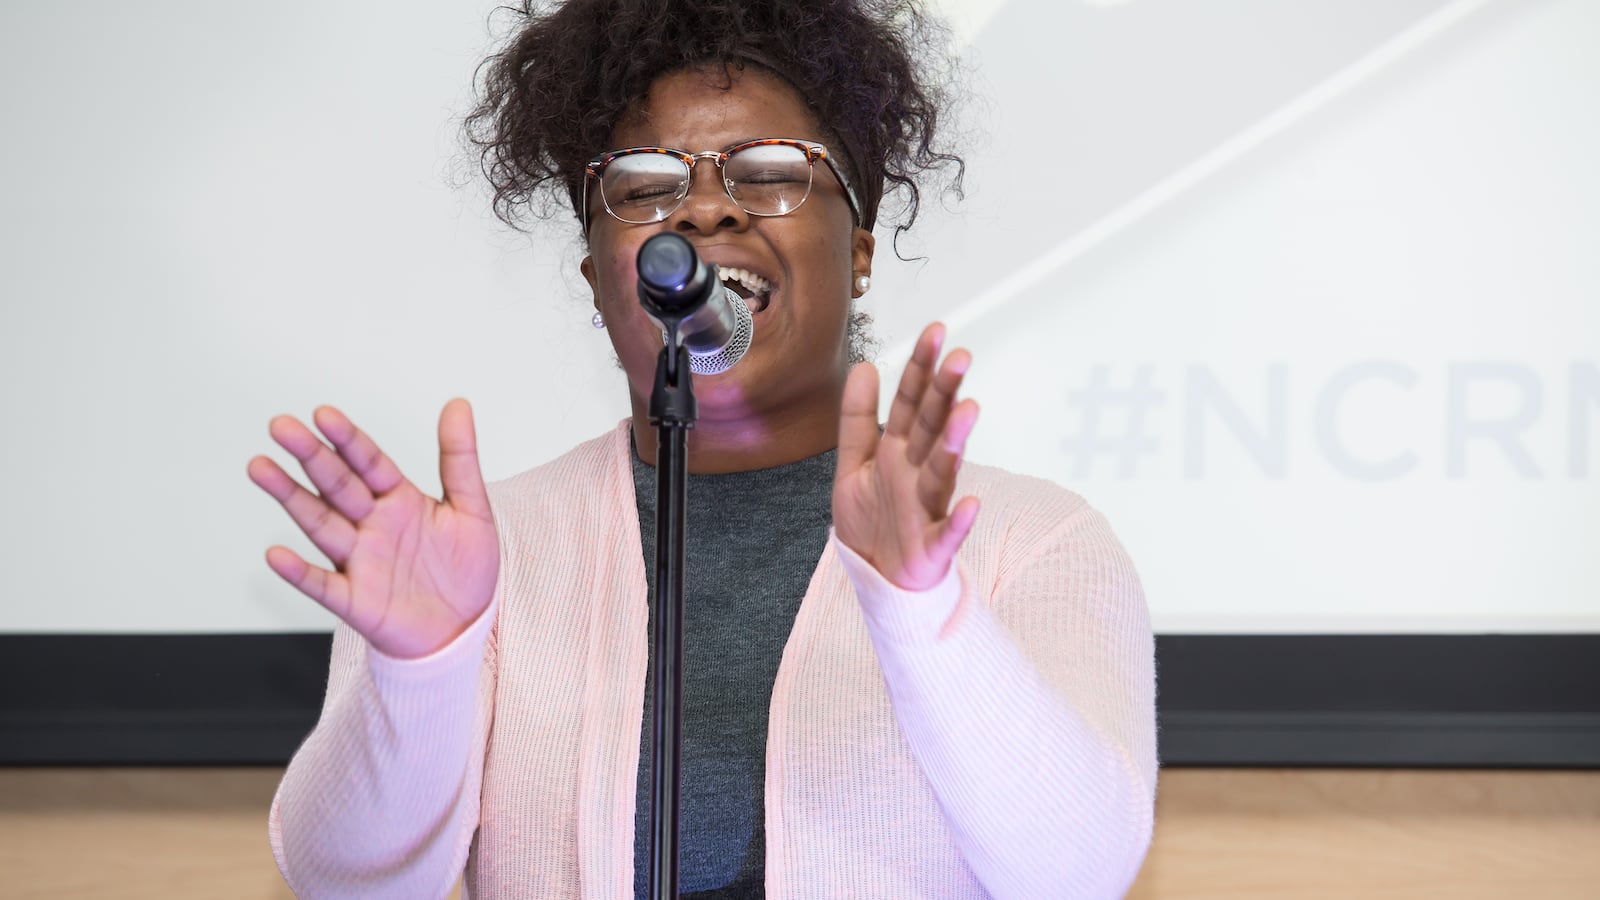 Kyla Lewis, a senior at GRAD Academy of Memphis, performs her poem that won first place in the teen category at the National Civil Rights Museum "Drop the Mic" poetry slam on Aug. 13.